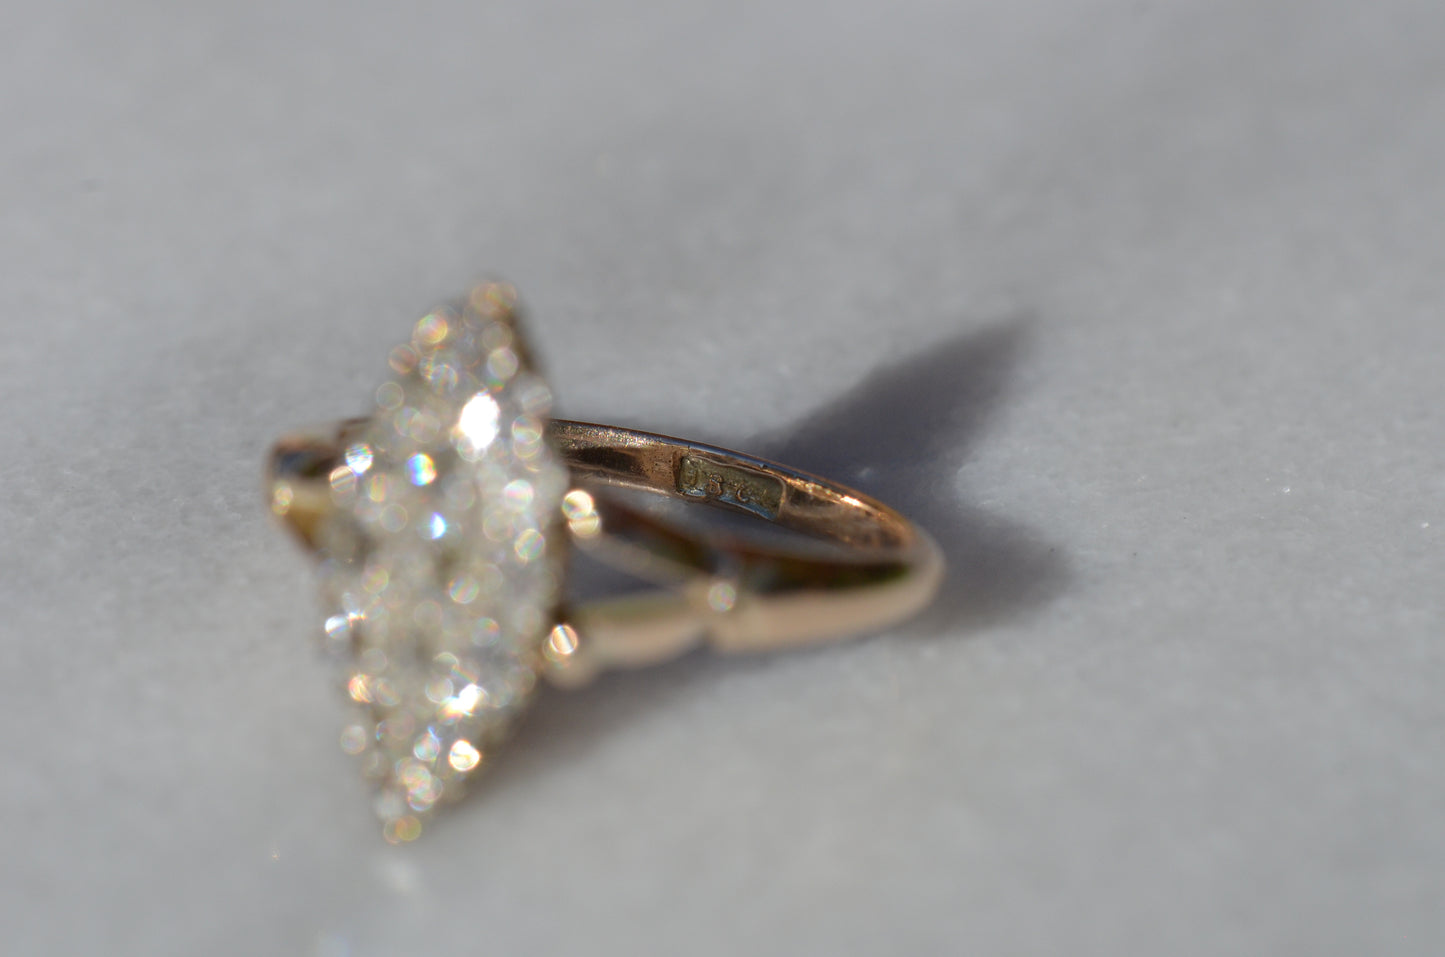 The closely cropped macro of this Victorian diamond navette ring is photographed looking into the band at a purity stamp that reads 18k, though the gold tests as 14k.